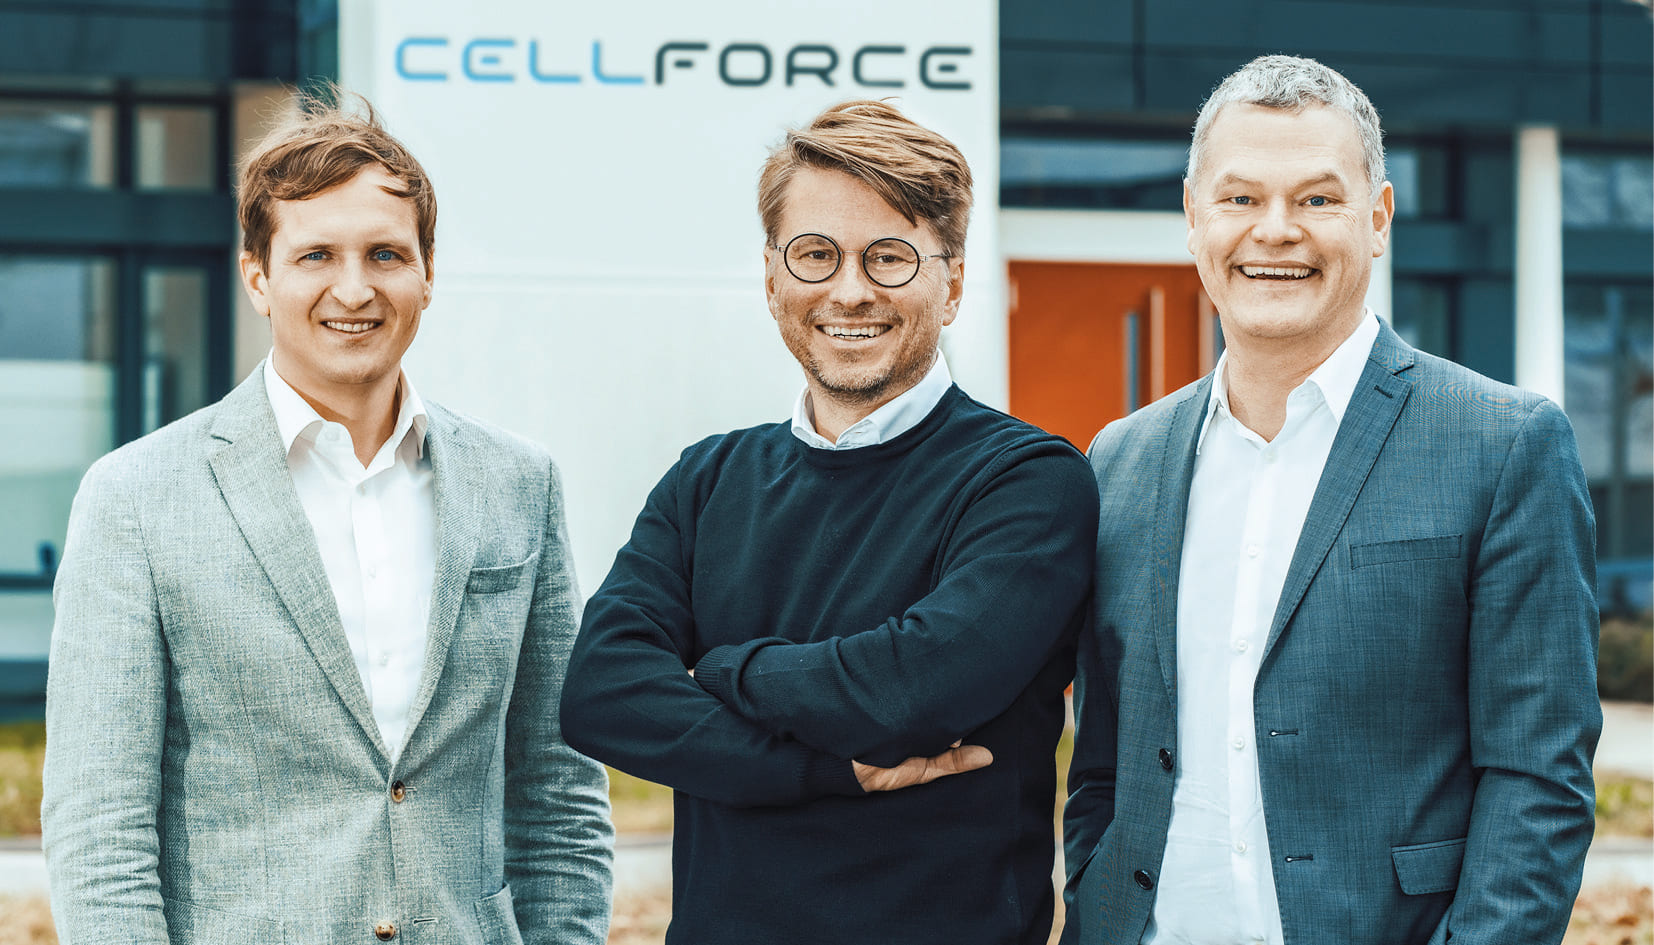 The managing directors of the Cellforce Group: Chief Operating Officer (COO) Dr. Markus Gräf, Chief Financial Officer (CFO) Wolfgang Hüsken and Chief Technology Officer (CTO) Torge Thönnessen